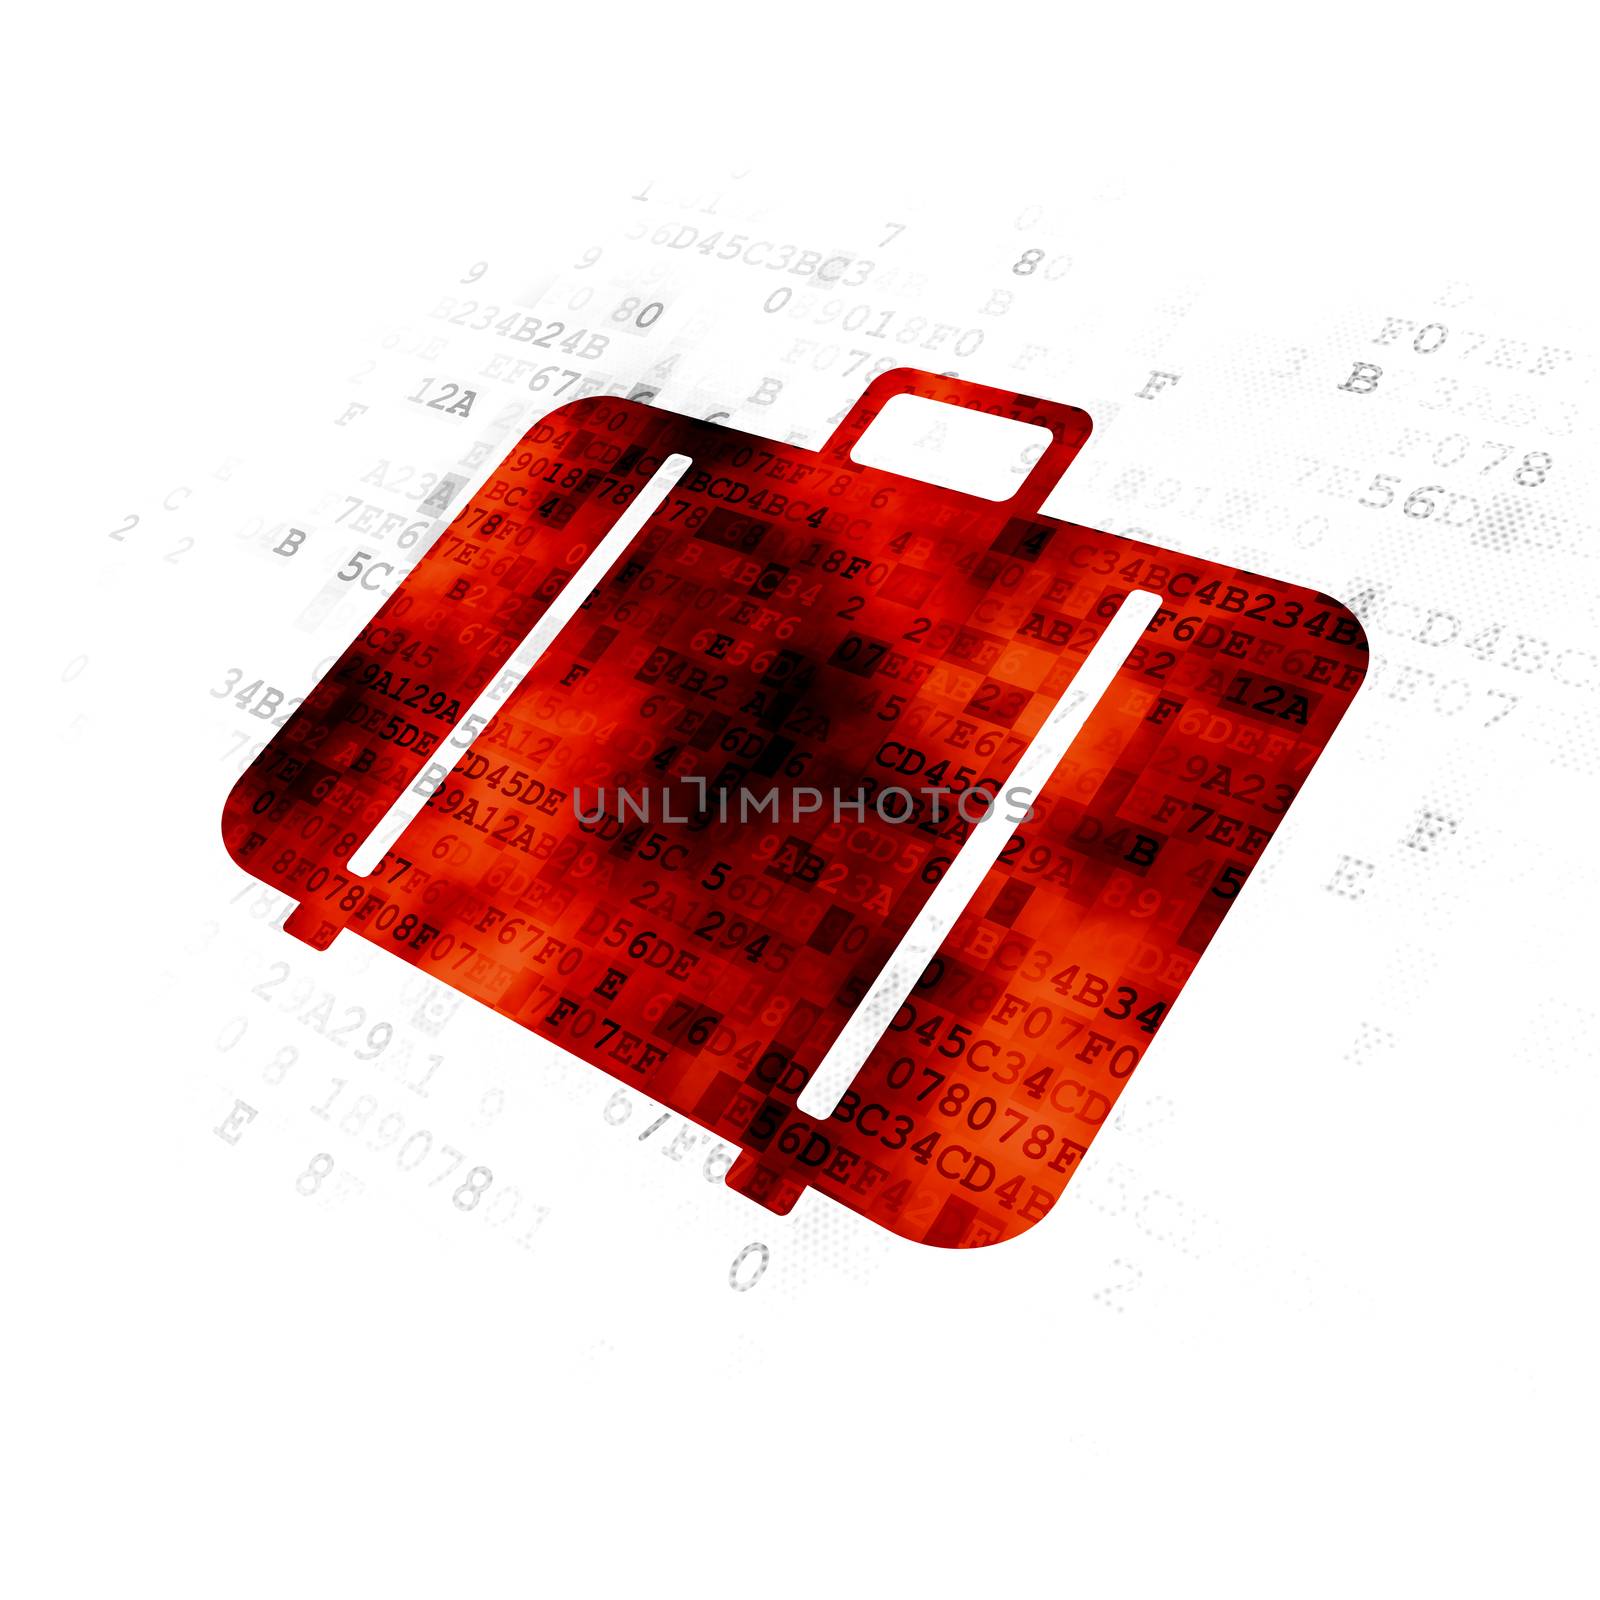 Travel concept: Pixelated red Bag icon on Digital background